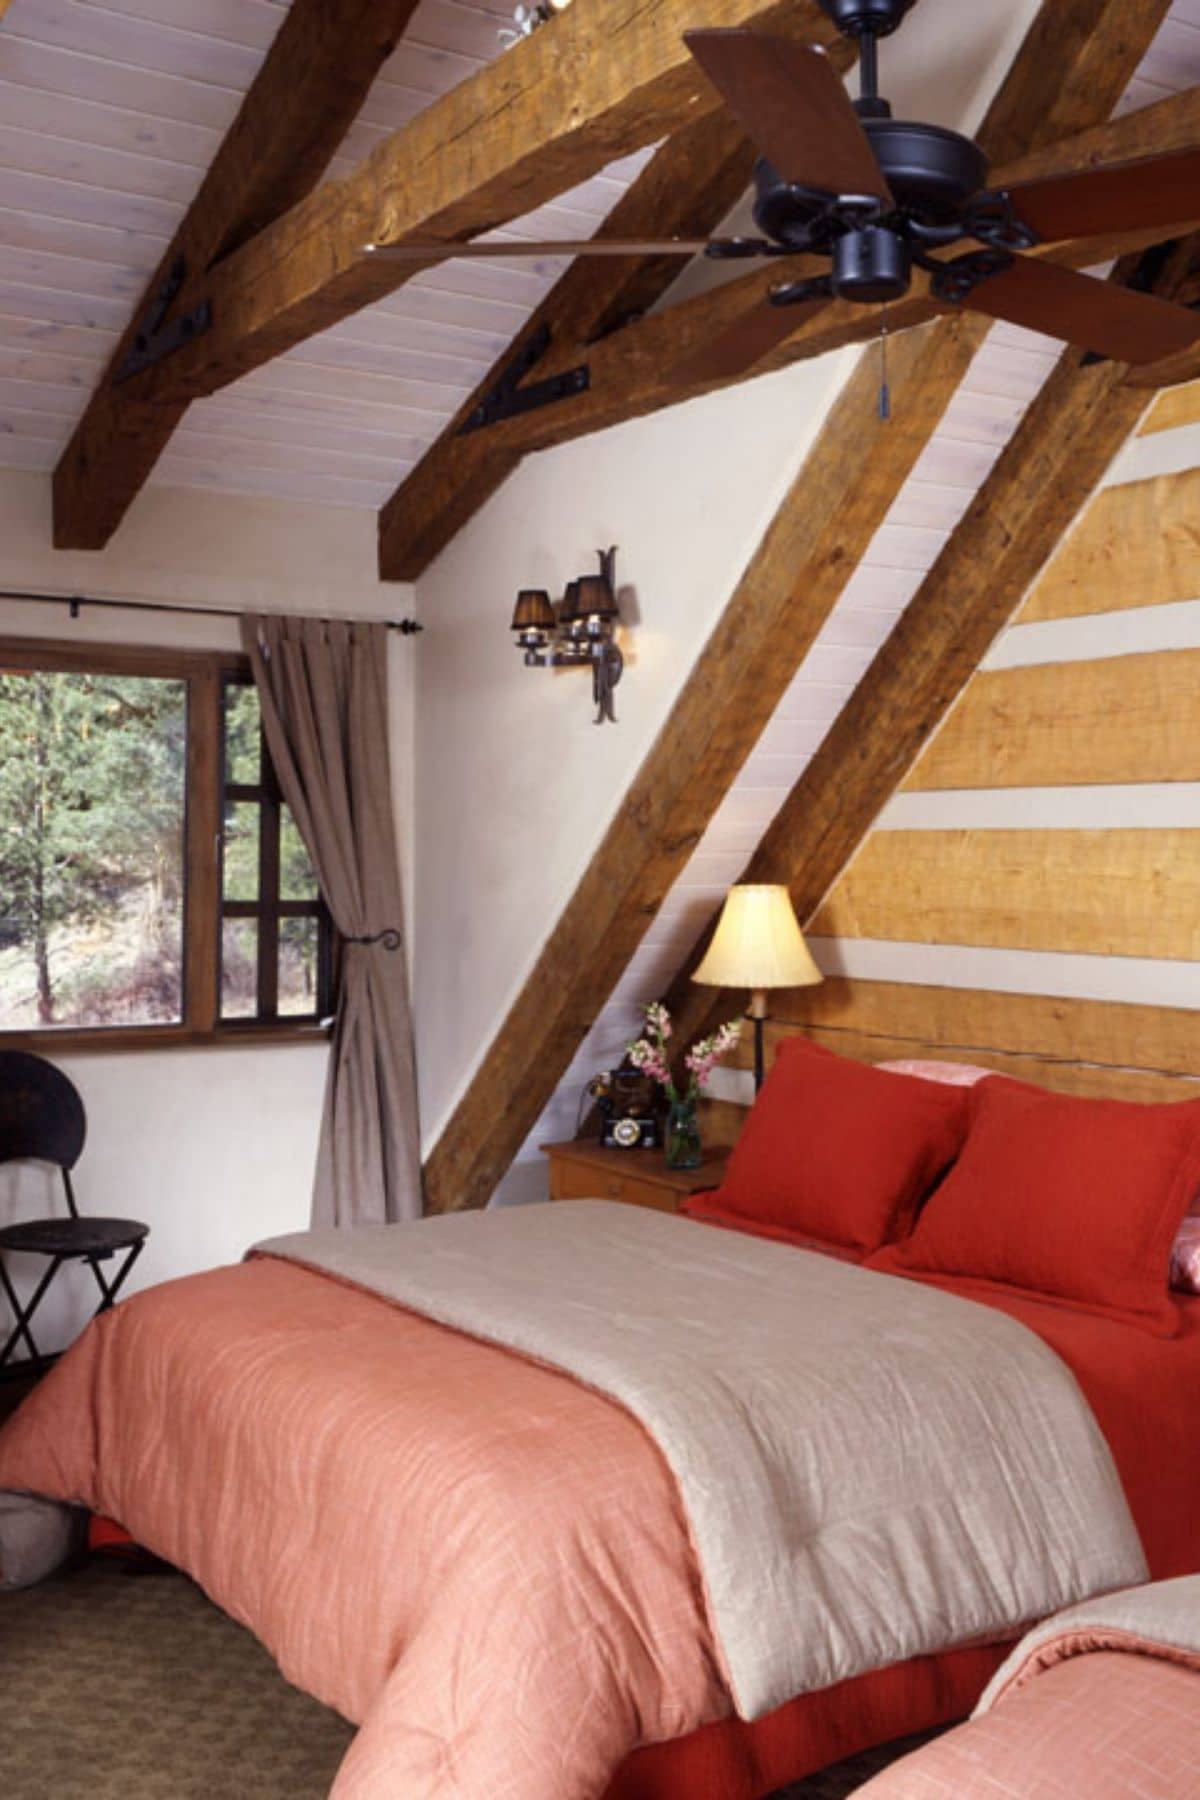 Bed against log cabin wall with pink and red bedding